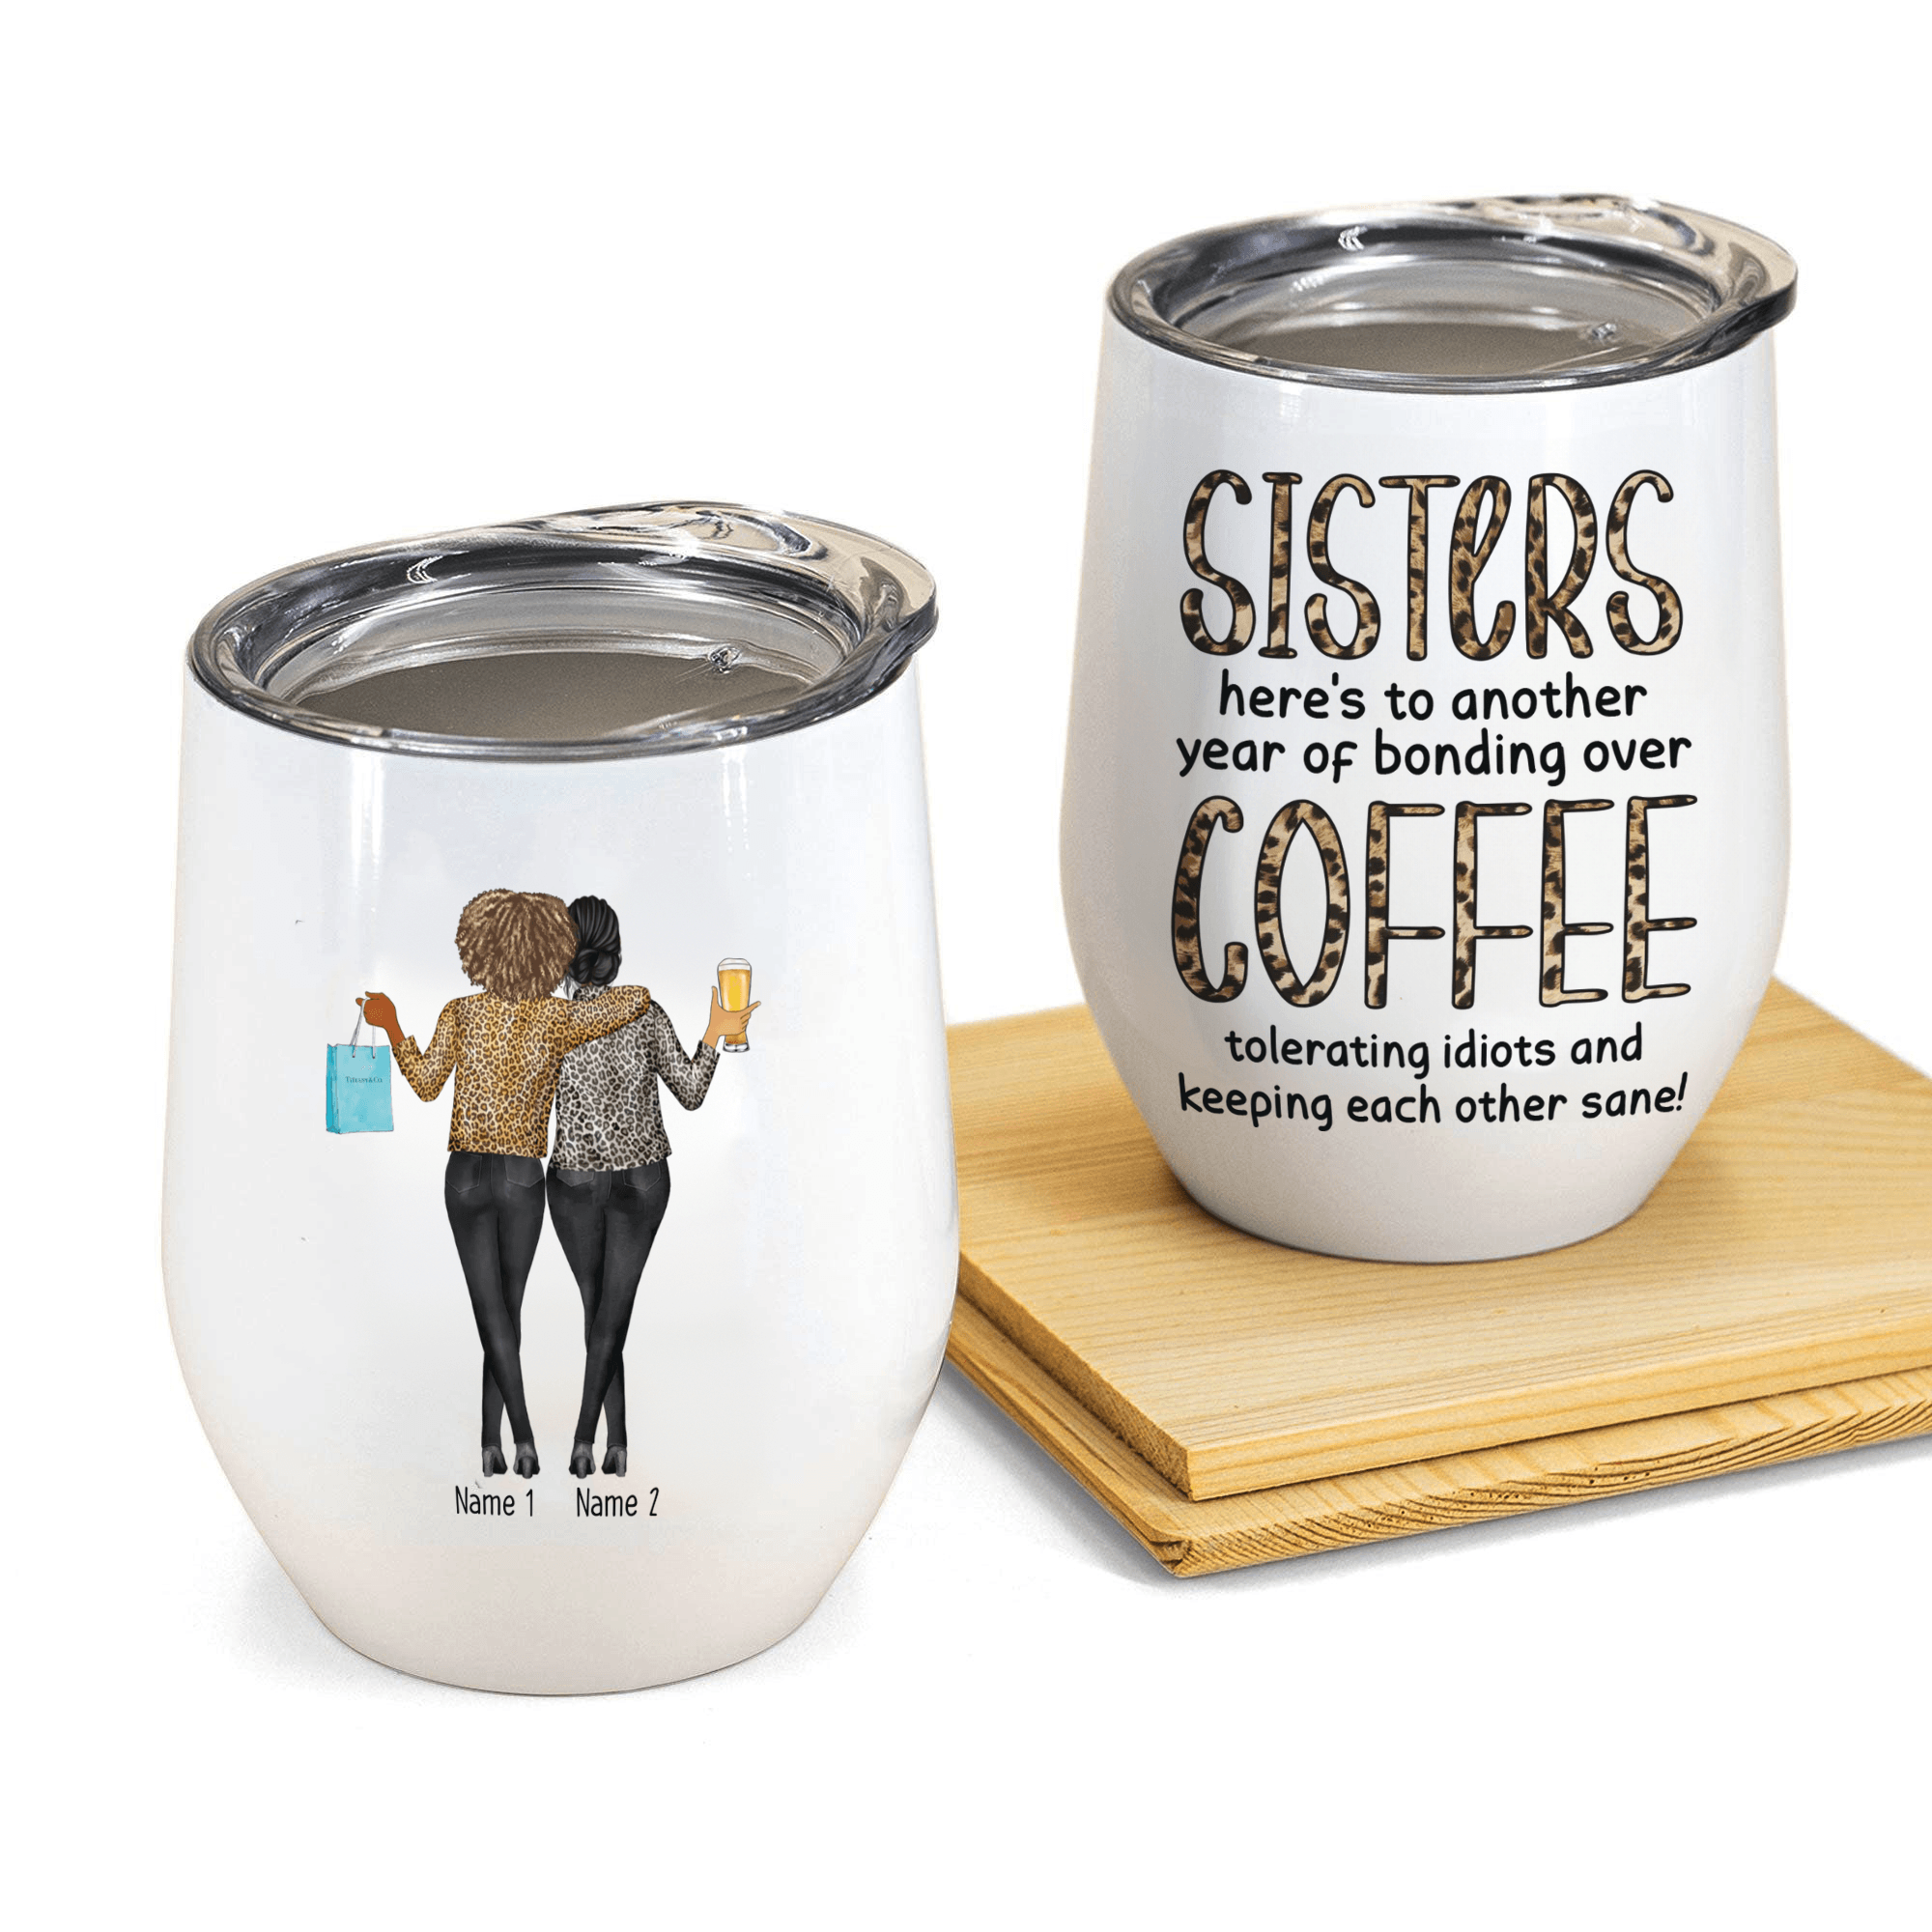 Thank You For Standing By My Side Friendship - Personalized Custom 12oz Wine Tumbler - Personalized Gift For Her, Besties, Friends, Sister, Soul Sisters - Suzitee Store